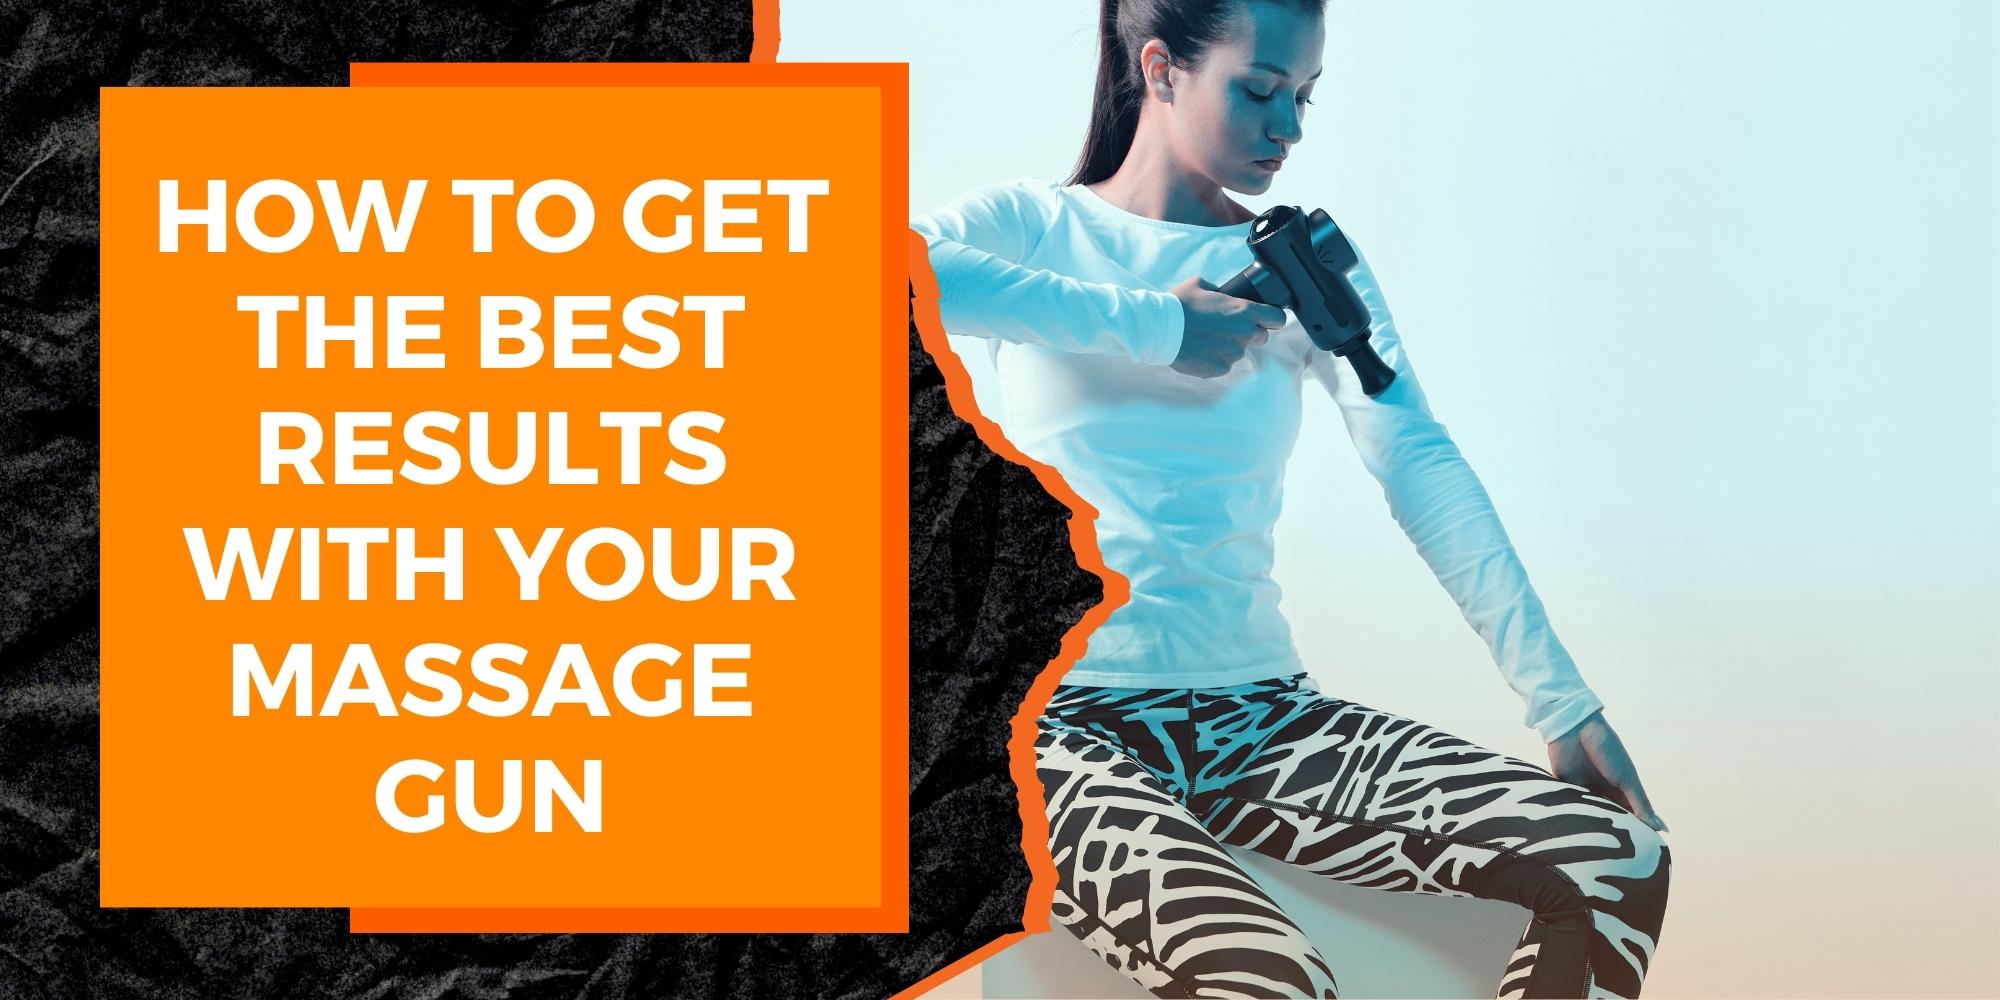 How to Get the Best Results With Your Massage Gun